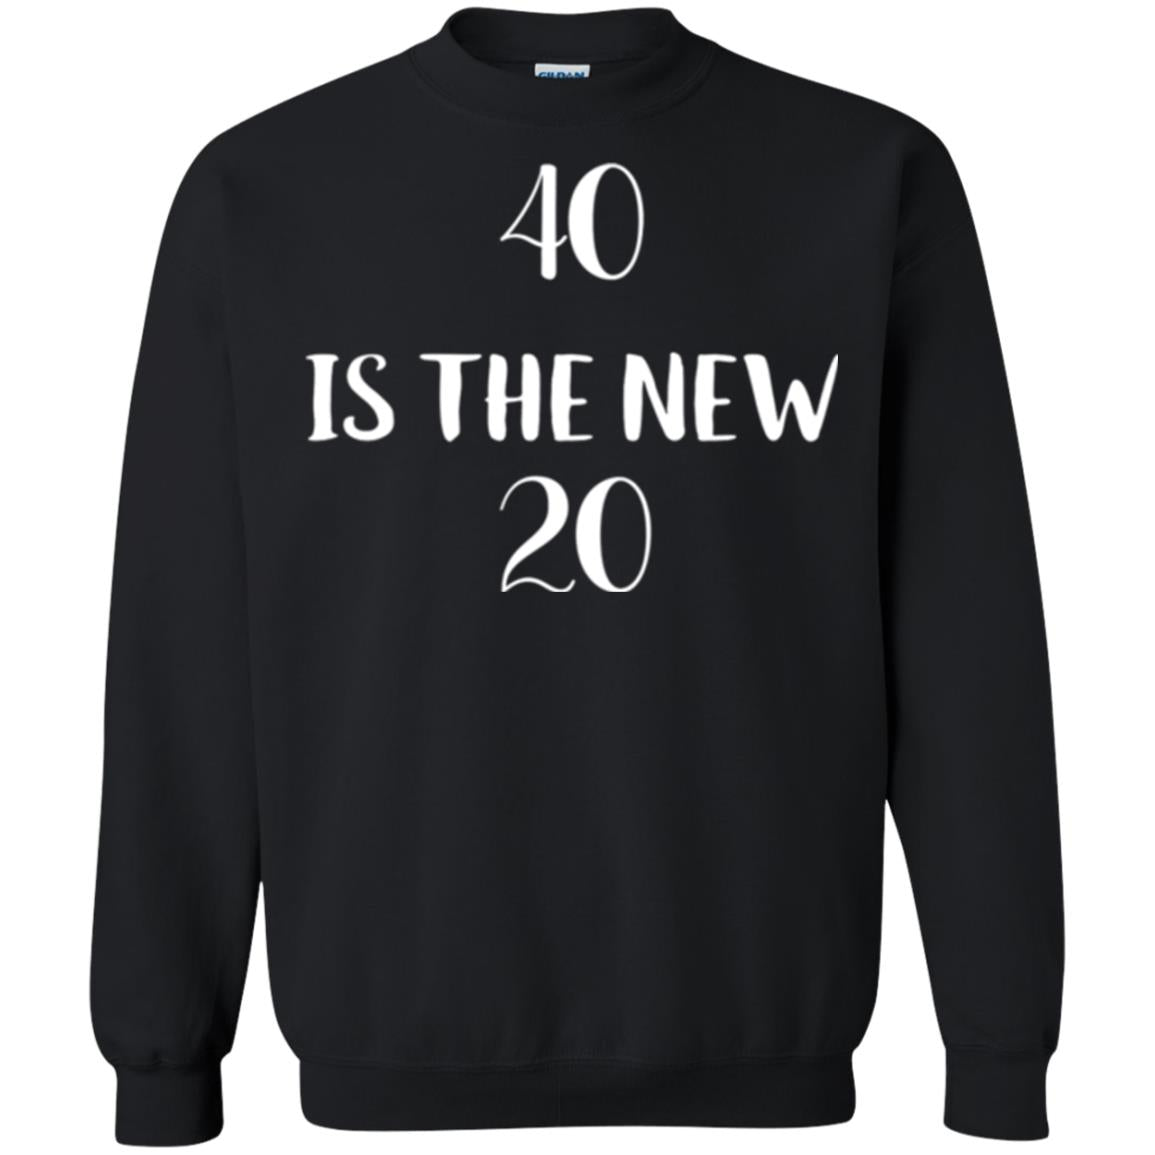 40 Is The New 20 Birthday T-shirt Funny 40th Birthday